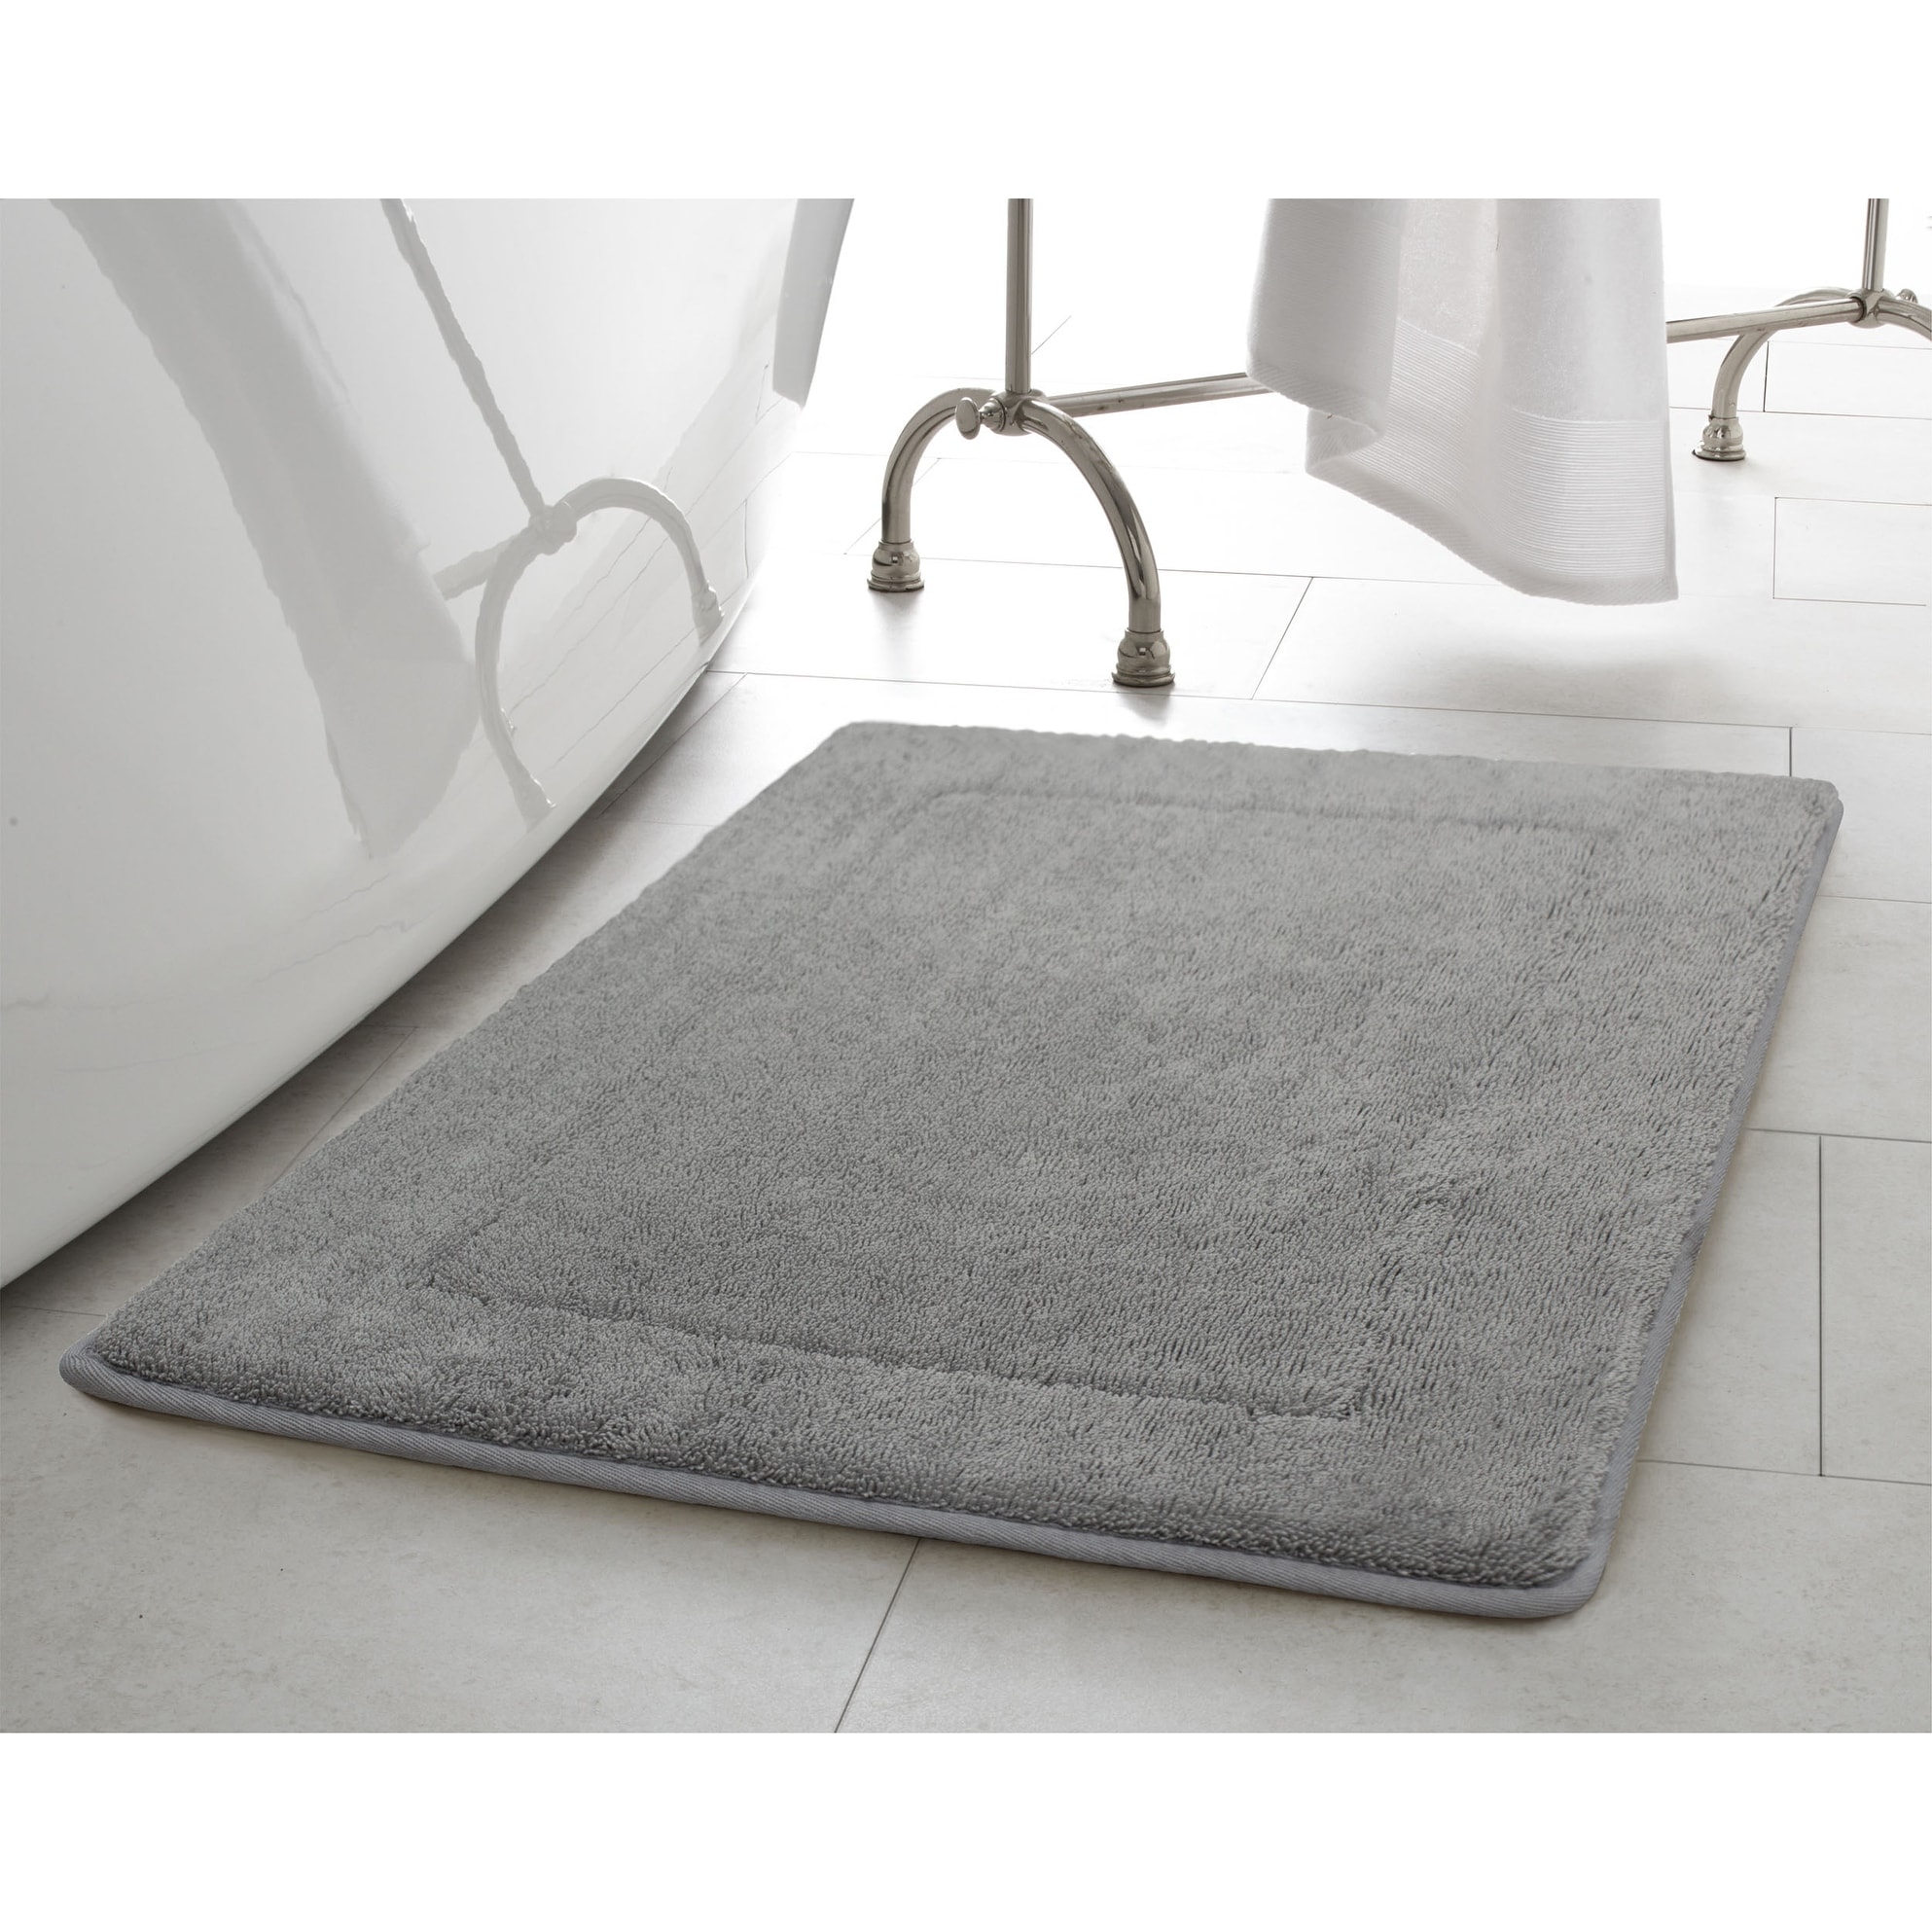 https://ak1.ostkcdn.com/images/products/is/images/direct/eb539358e9d85eb62a08c9195f025983a6bae185/Oliver-Brown-Terry-Memory-Foam-Bath-Mat.jpg